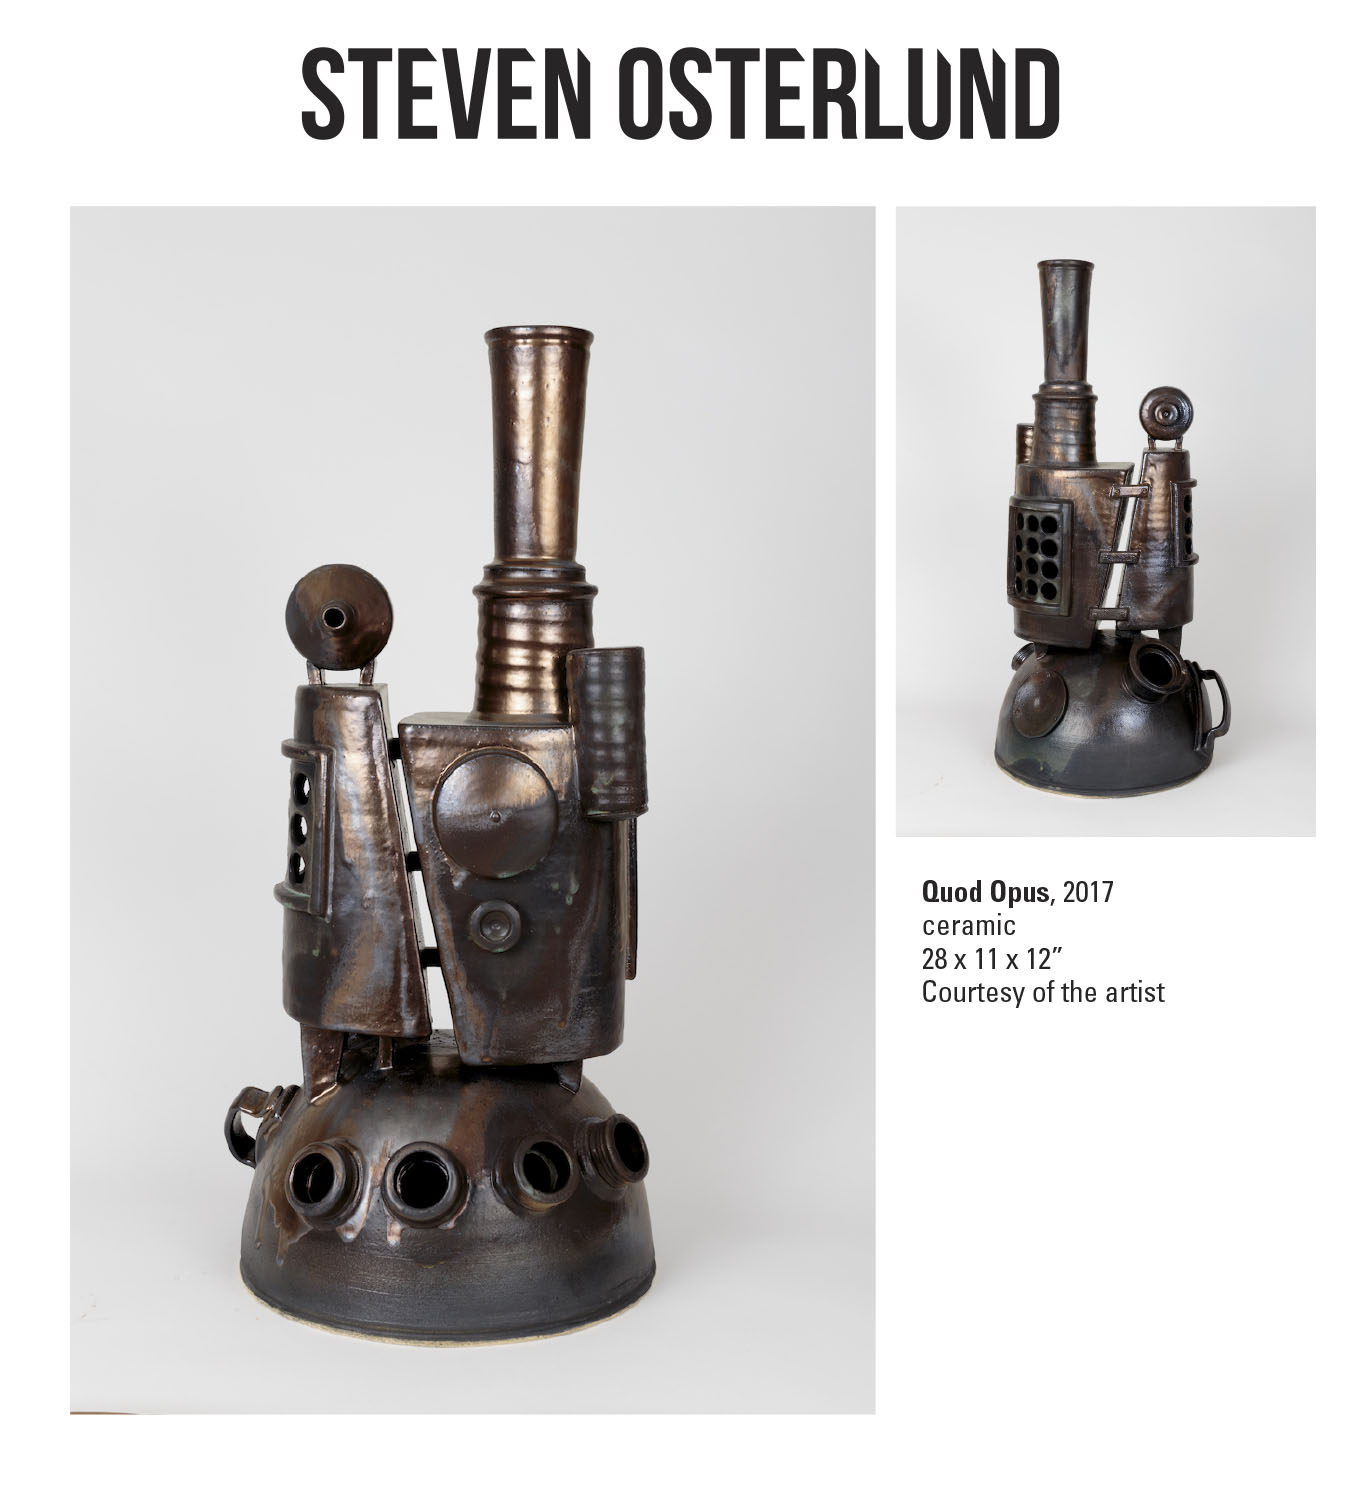 Steven Osterlund, Quod Opus, 2017. Ceramic. 28 x 11 x 12” Courtesy of the artist. A sculpture of industrial looking equipment with various shapes in a bronze color